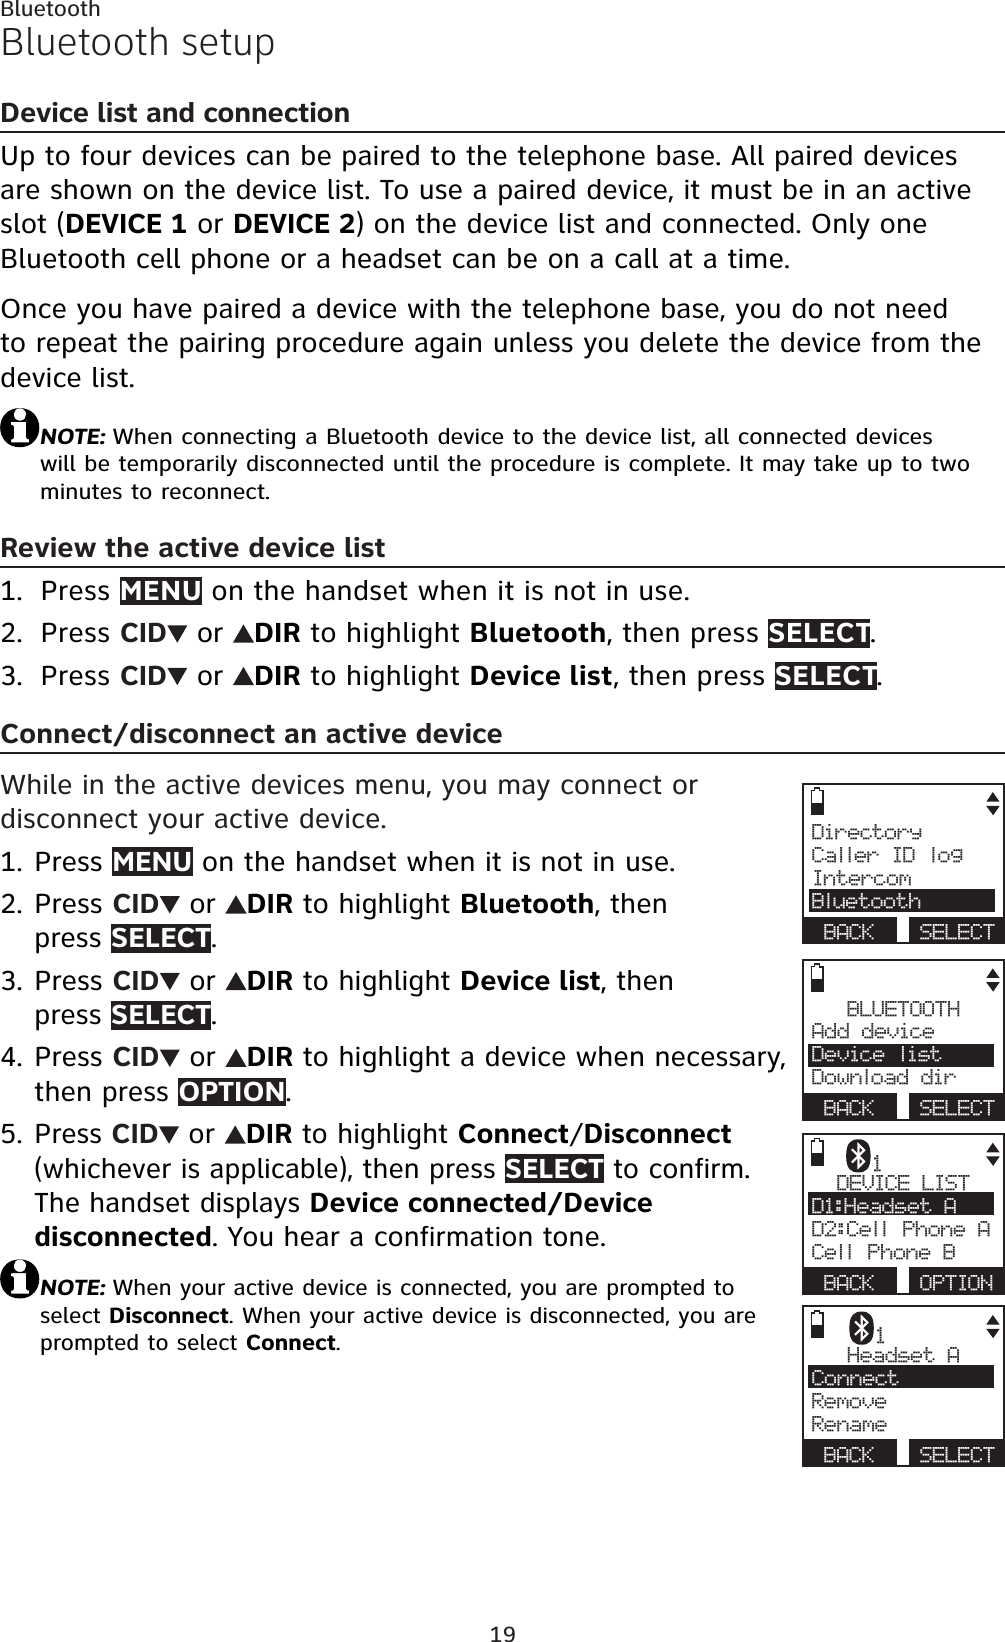 19BluetoothBluetooth setupDevice list and connectionUp to four devices can be paired to the telephone base. All paired devices are shown on the device list. To use a paired device, it must be in an active slot (DEVICE 1 or DEVICE 2) on the device list and connected. Only one Bluetooth cell phone or a headset can be on a call at a time.Once you have paired a device with the telephone base, you do not need to repeat the pairing procedure again unless you delete the device from the device list.NOTE: When connecting a Bluetooth device to the device list, all connected devices will be temporarily disconnected until the procedure is complete. It may take up to two minutes to reconnect.Review the active device listPress MENU on the handset when it is not in use.Press CID  or  DIR to highlight Bluetooth, then press SELECT.Press CID  or  DIR to highlight Device list, then press SELECT.Connect/disconnect an active deviceWhile in the active devices menu, you may connect or disconnect your active device.Press MENU on the handset when it is not in use.Press CID  or  DIR to highlight Bluetooth, then press SELECT.Press CID  or  DIR to highlight Device list, then press SELECT.Press CID  or  DIR to highlight a device when necessary, then press OPTION.Press CID  or  DIRto highlight Connect/Disconnect(whichever is applicable), then press SELECT to confirm. The handset displays Device connected/Device disconnected. You hear a confirmation tone.NOTE: When your active device is connected, you are prompted to select Disconnect. When your active device is disconnected, you are prompted to select Connect.1.2.3.1.2.3.4.5.BLUETOOTHAdd device Device listDownload dirBACK SELECTDirectoryCaller ID logIntercomBluetoothBACK SELECTDEVICE LISTD1:Headset AD2:Cell Phone ACell Phone BBACK OPTION1Headset AConnectRemoveRenameBACK SELECT1